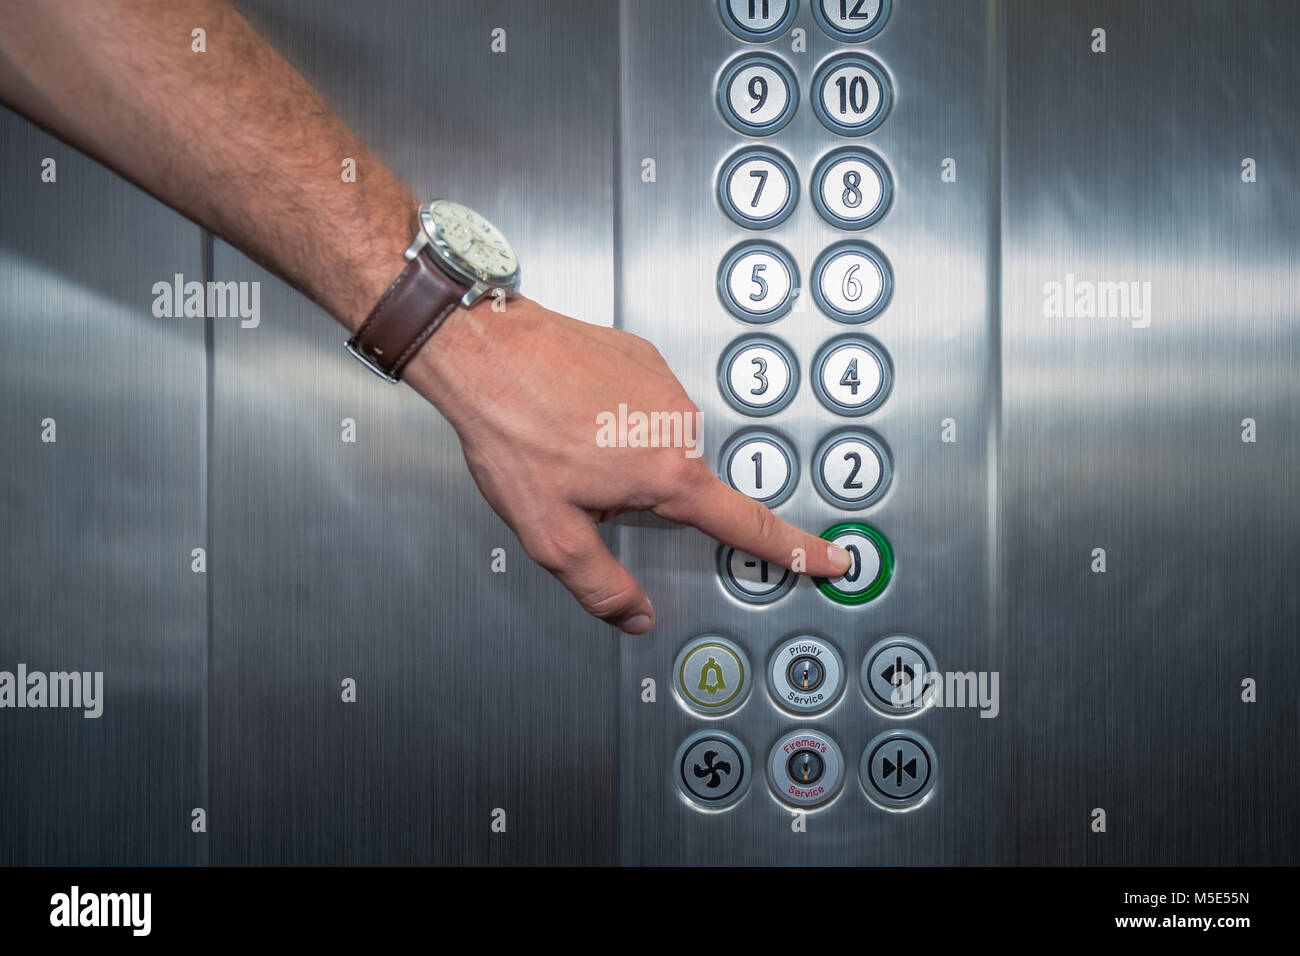 Male forefinger pressing the zero floor button in the elevator. Iron made interior. Stock Photo